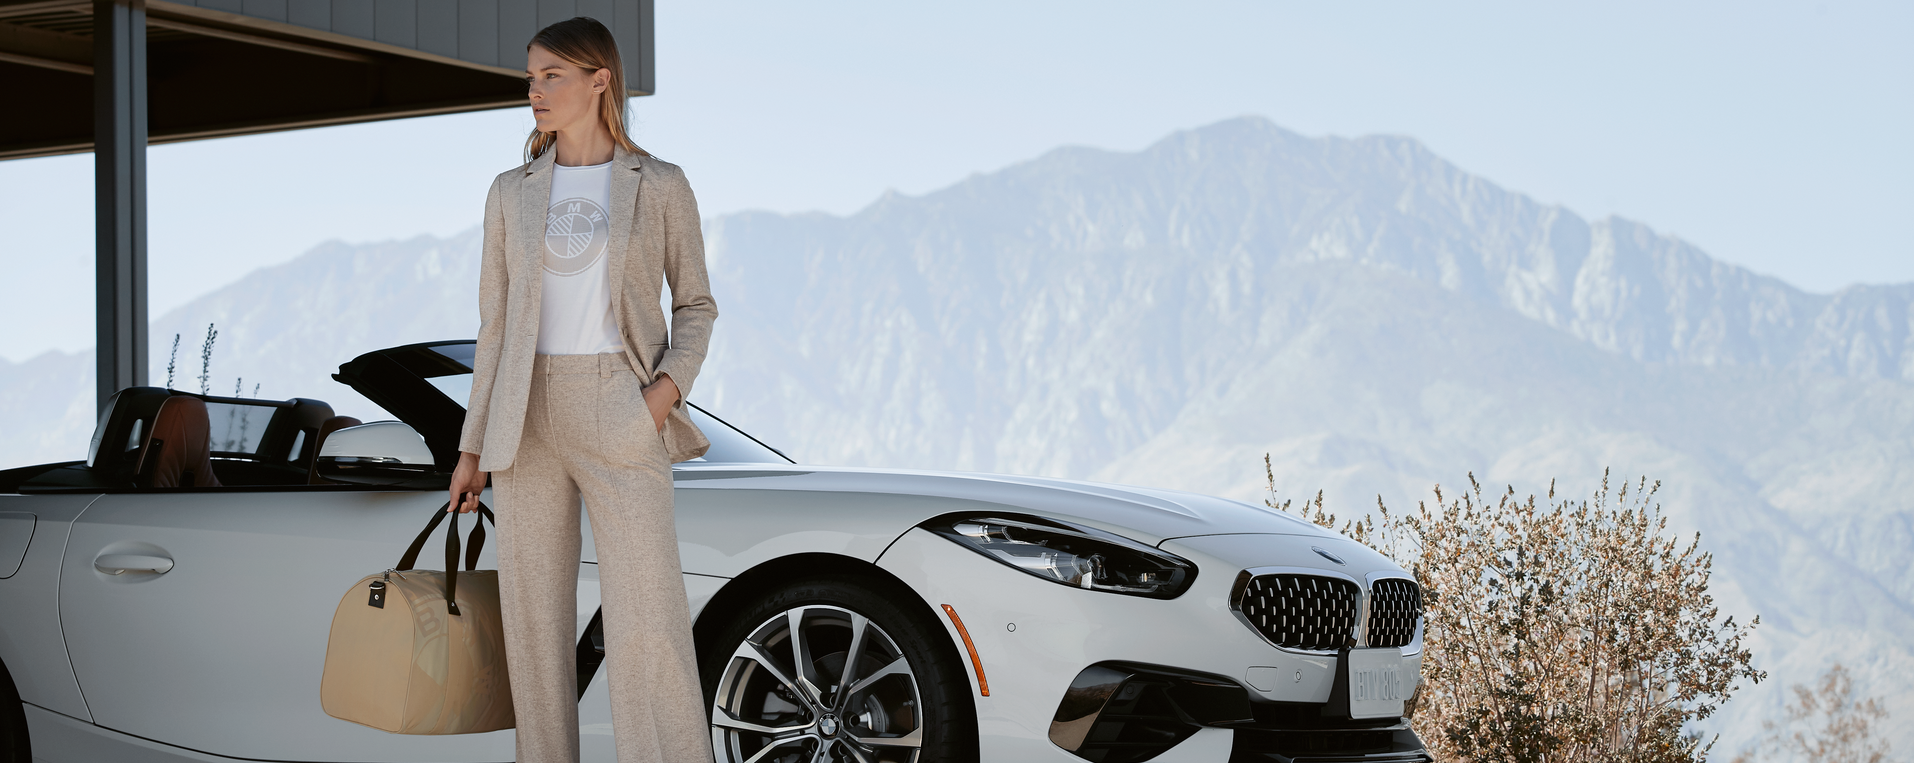 Woman standing by a white BMW car parked with a mountain view